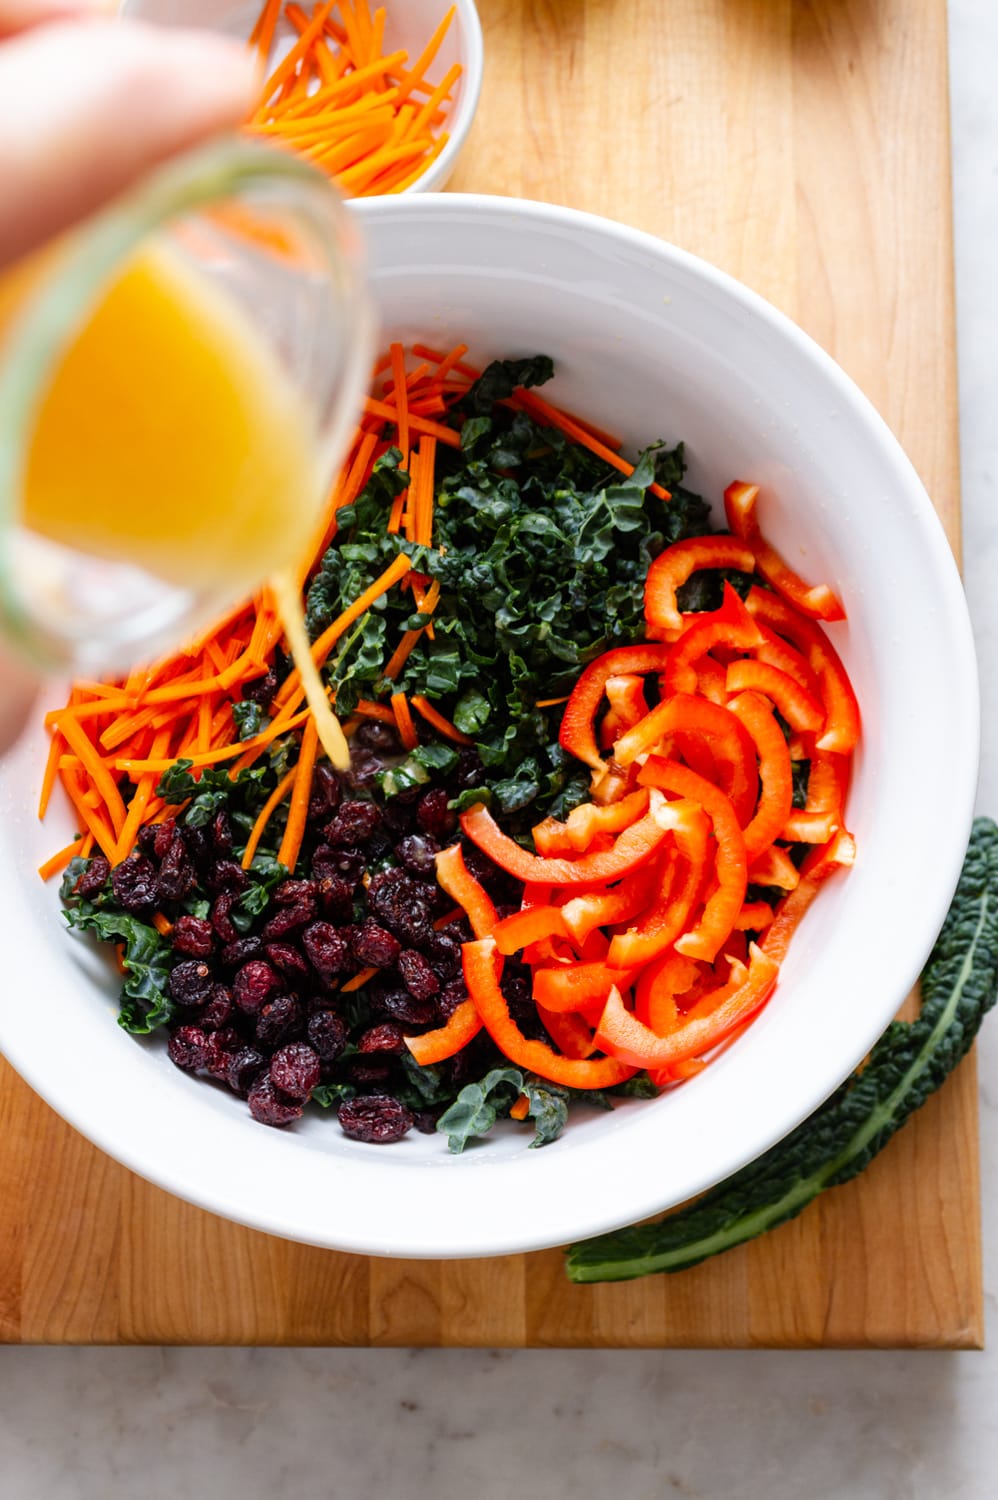 top down view of orange dressing being poured into a white bowl filled with chopped kale, shredded carrots, dried cranberries and sliced red bell peppers.